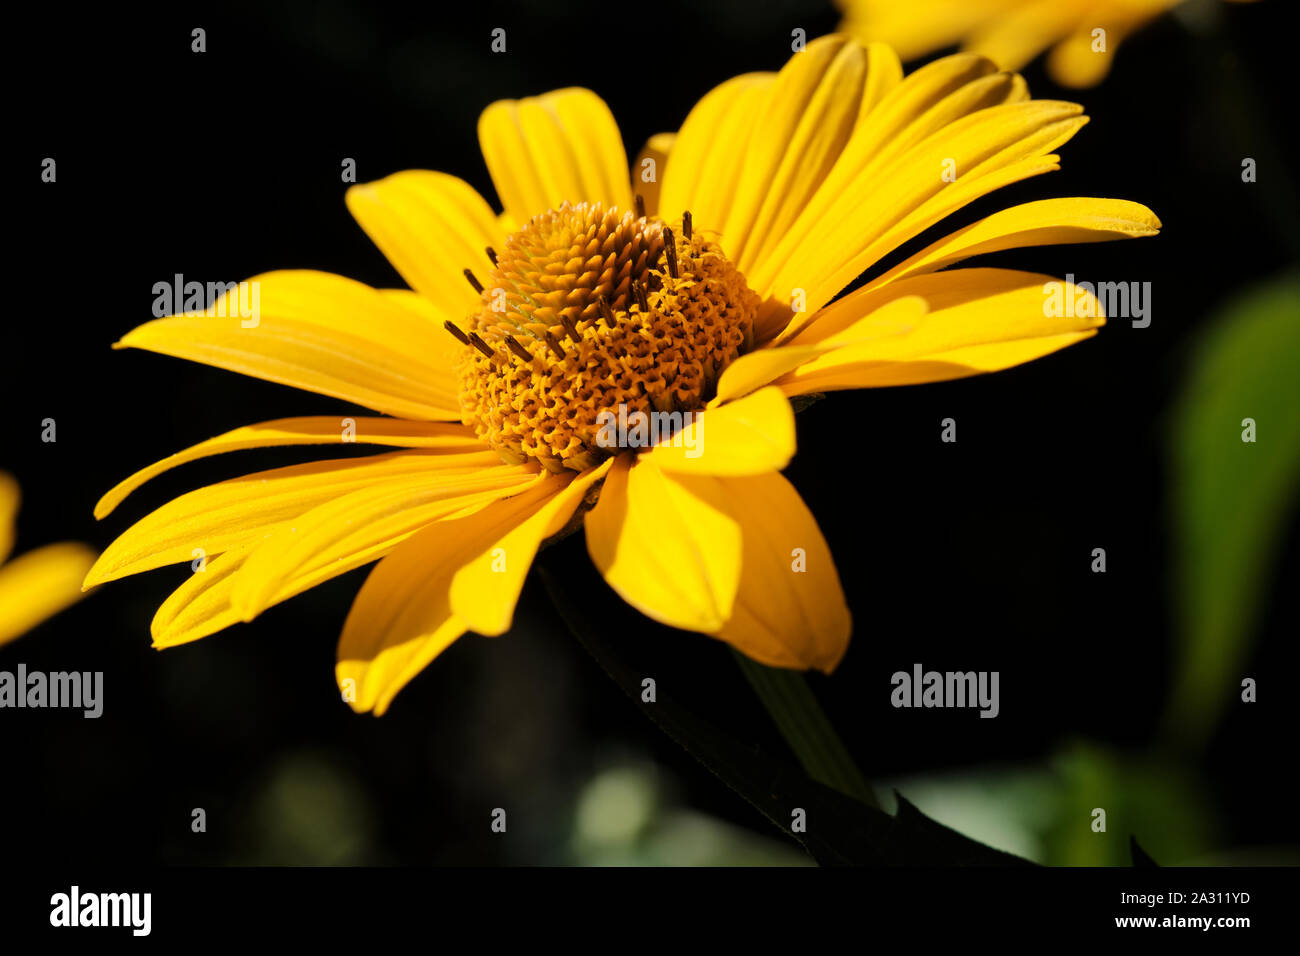 Close-up of a yellow flower blossom in the sunshine with blurred background Stock Photo